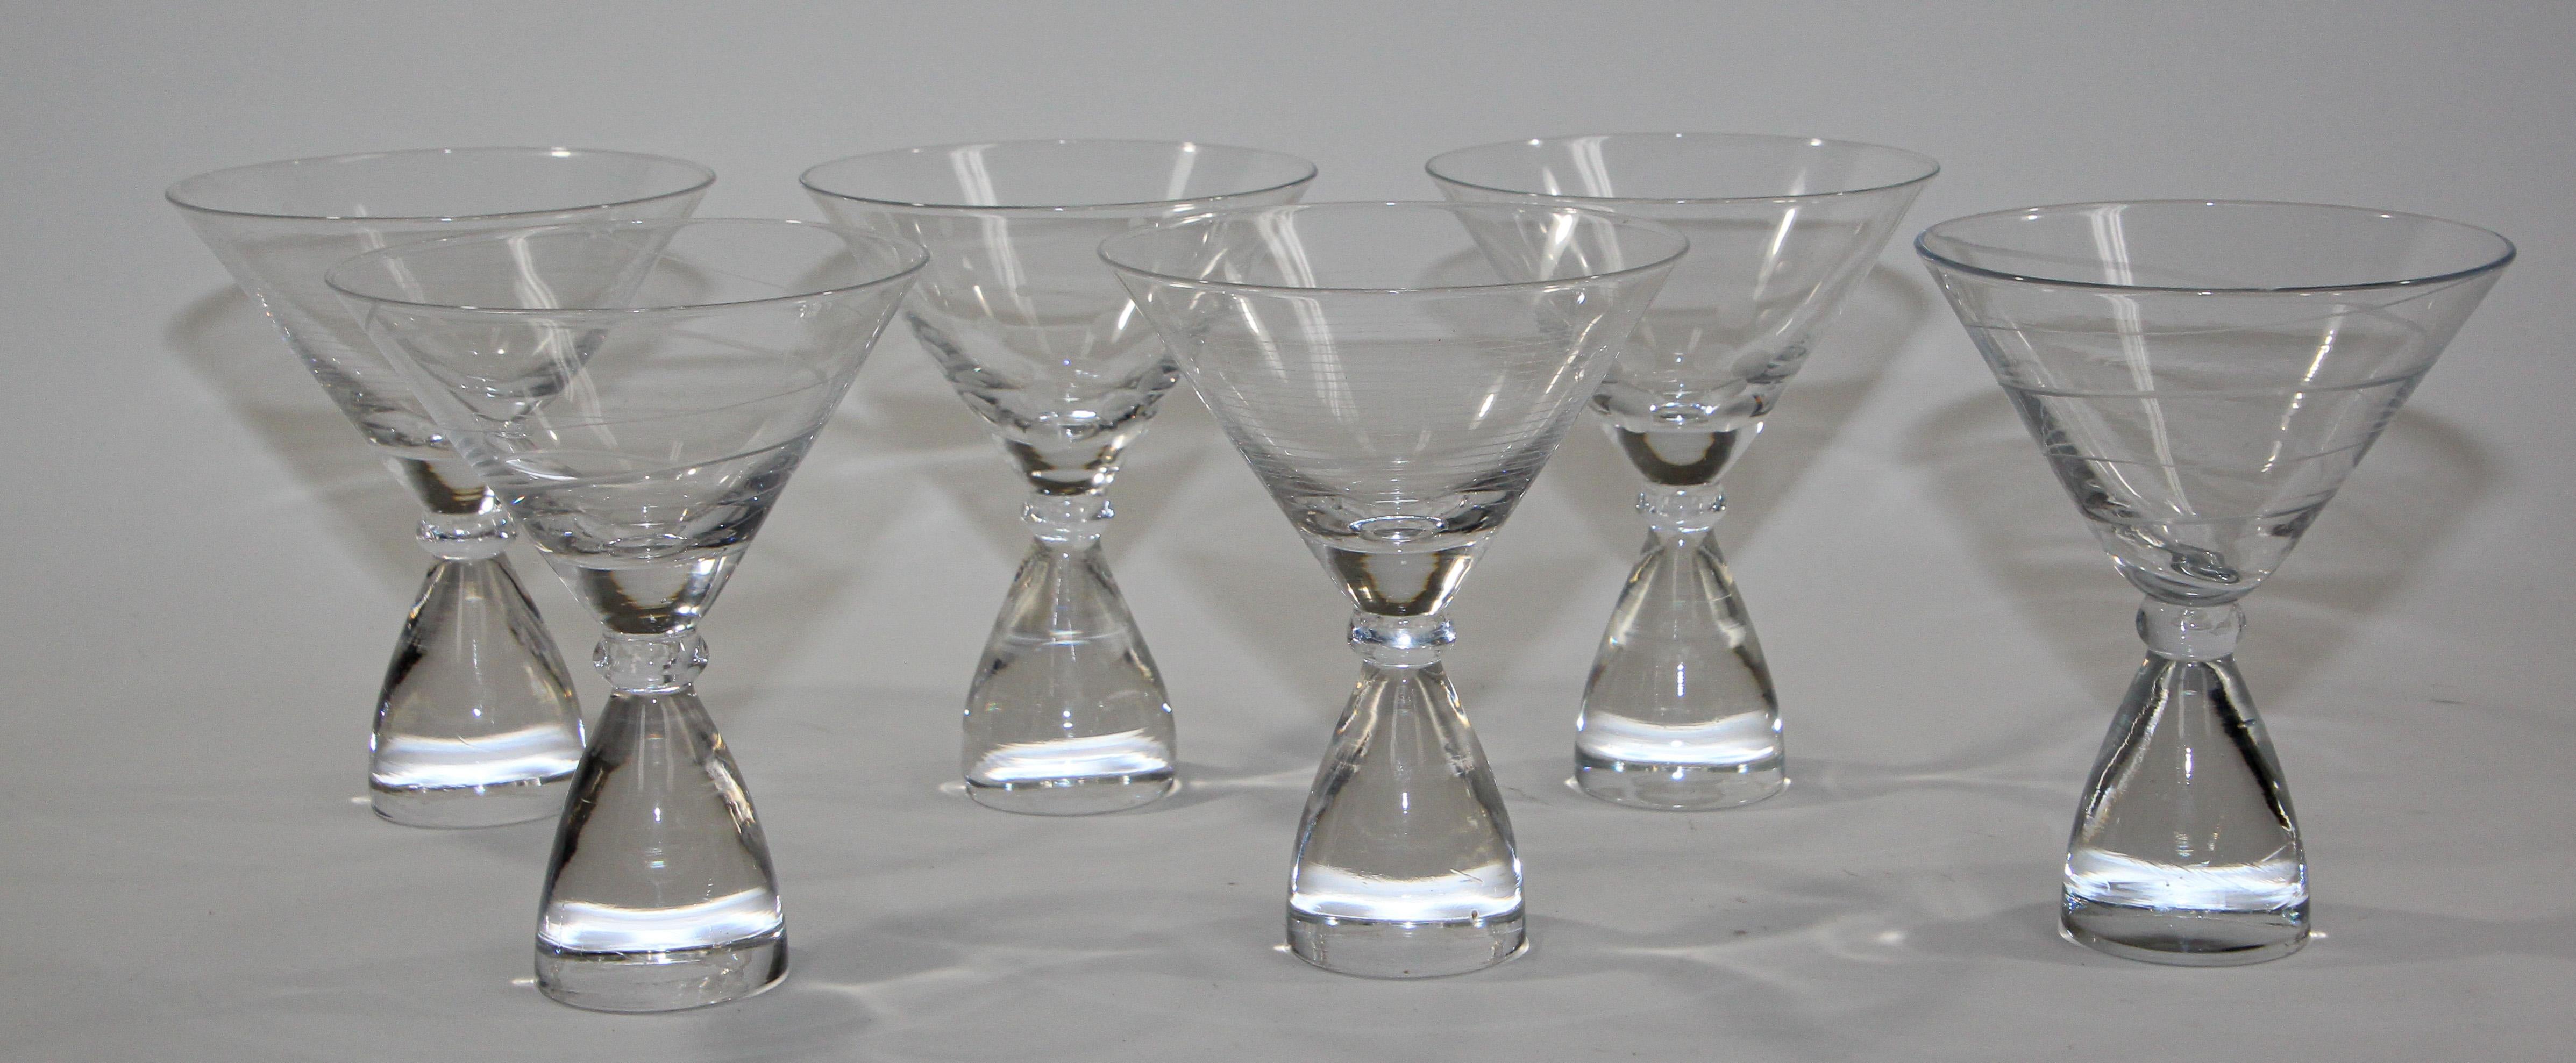 Vintage Post Modern Steuben style Martini drinking glasses set of 5.
Tear-shaped bubble clear Etched crystal Martini.
The glasses are etched with different design.
Measures: 4.75